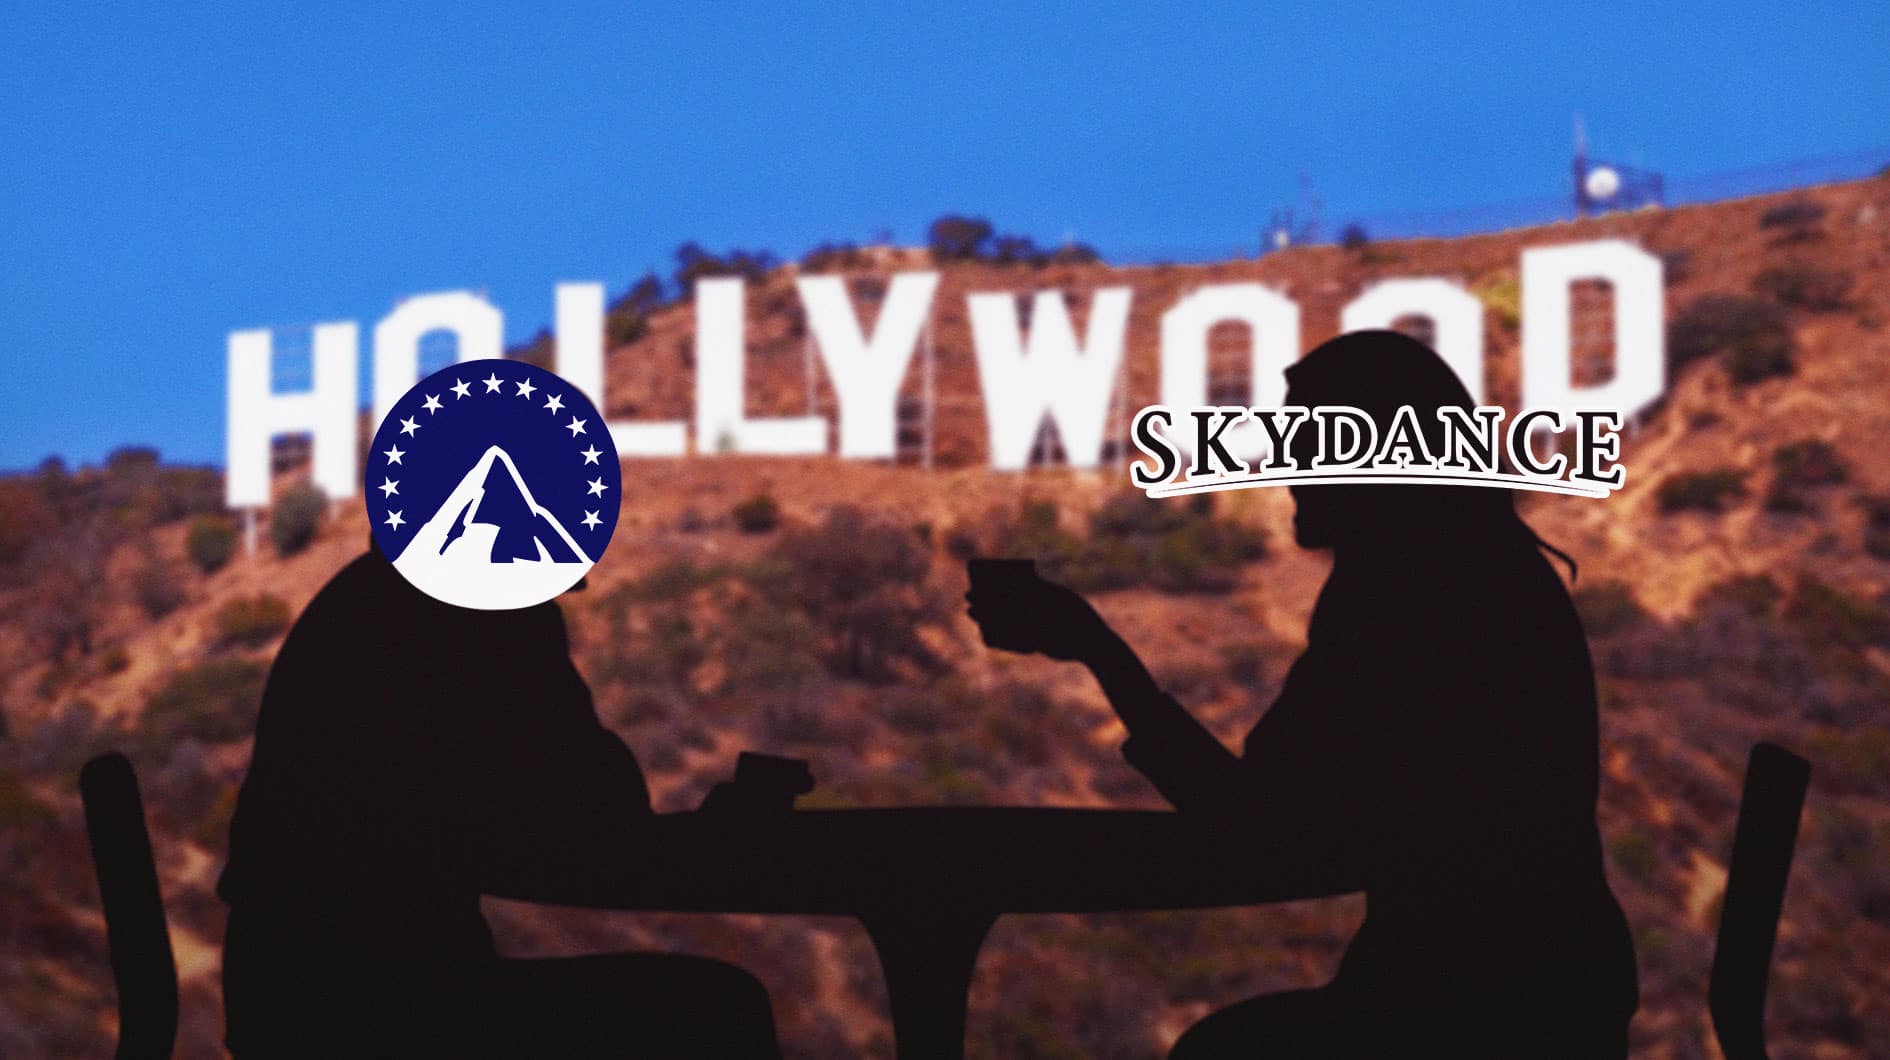 Paramount's stunning return to the negotiating table with Skydance